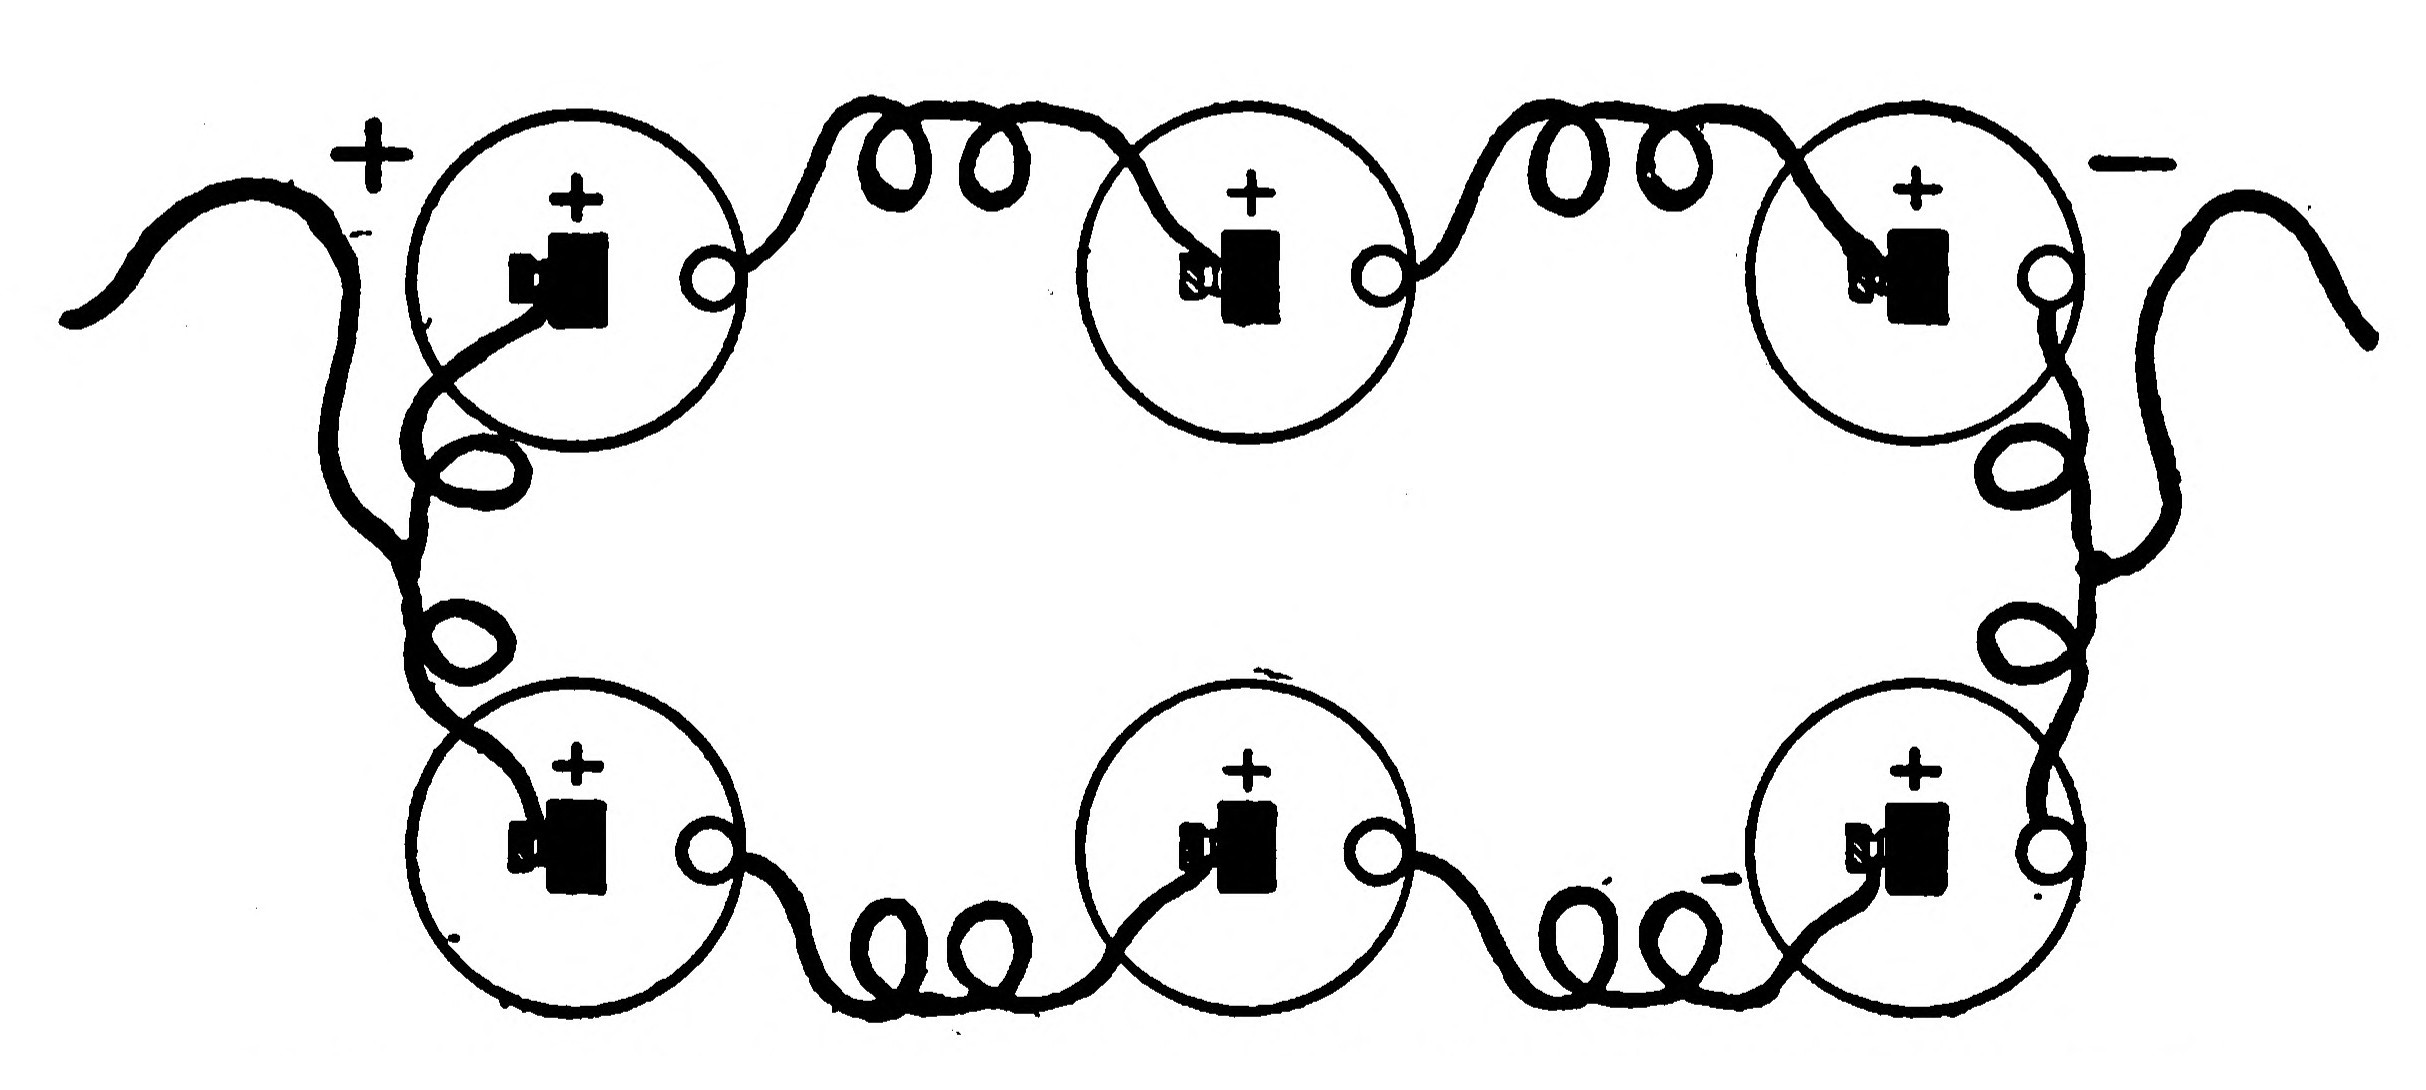 FIG. 35.—Showing how to connect a Battery of Cells in Series-Multiple.